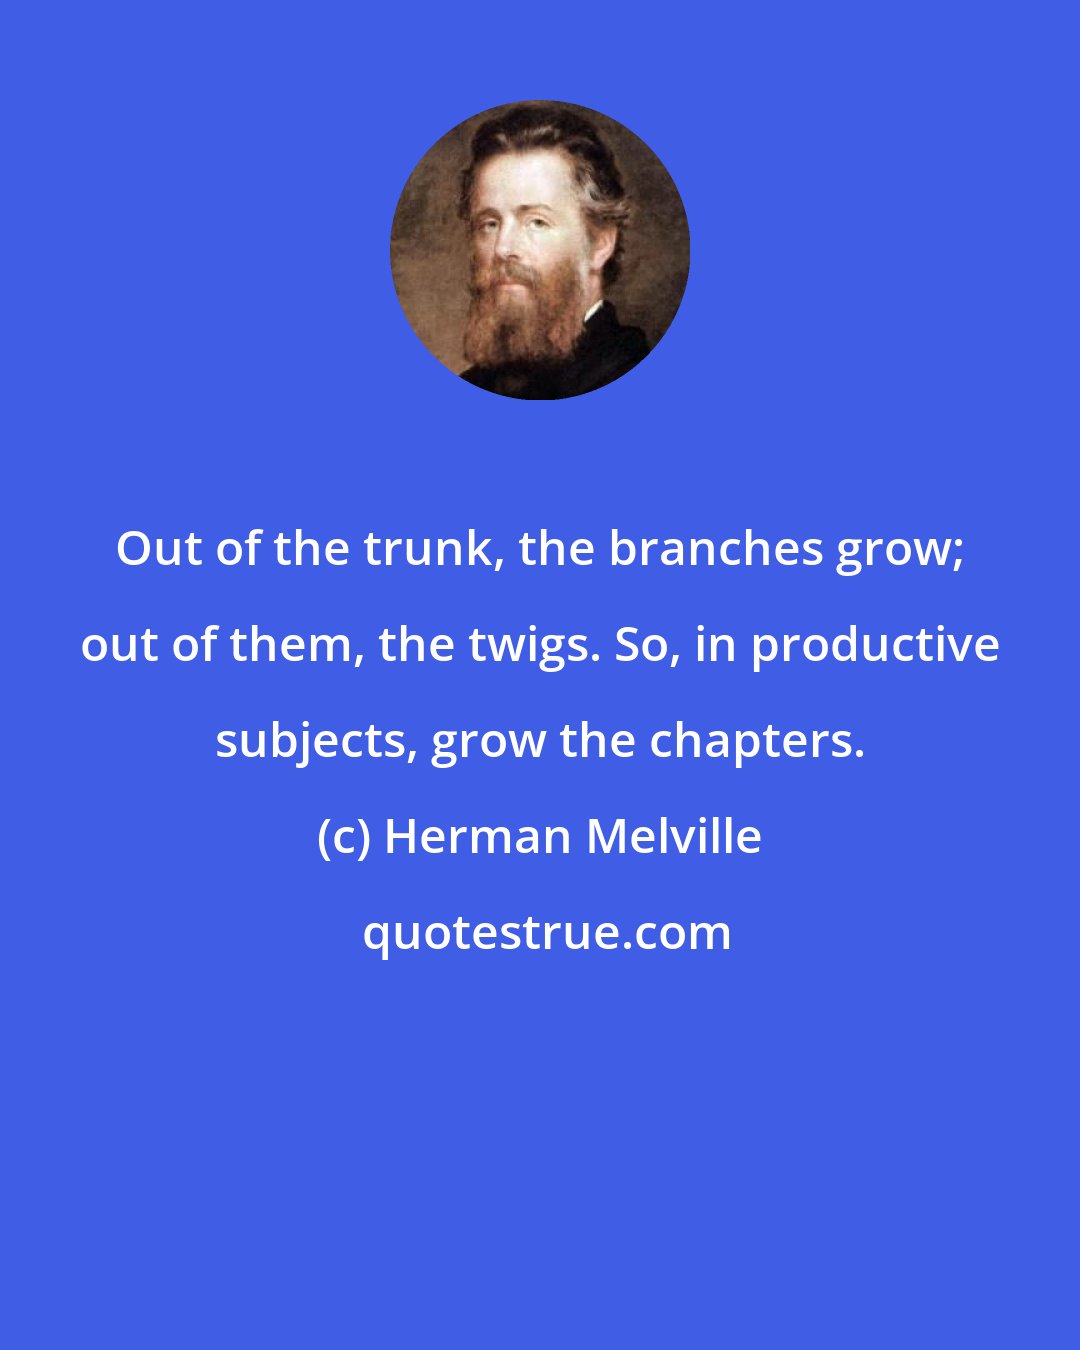 Herman Melville: Out of the trunk, the branches grow; out of them, the twigs. So, in productive subjects, grow the chapters.